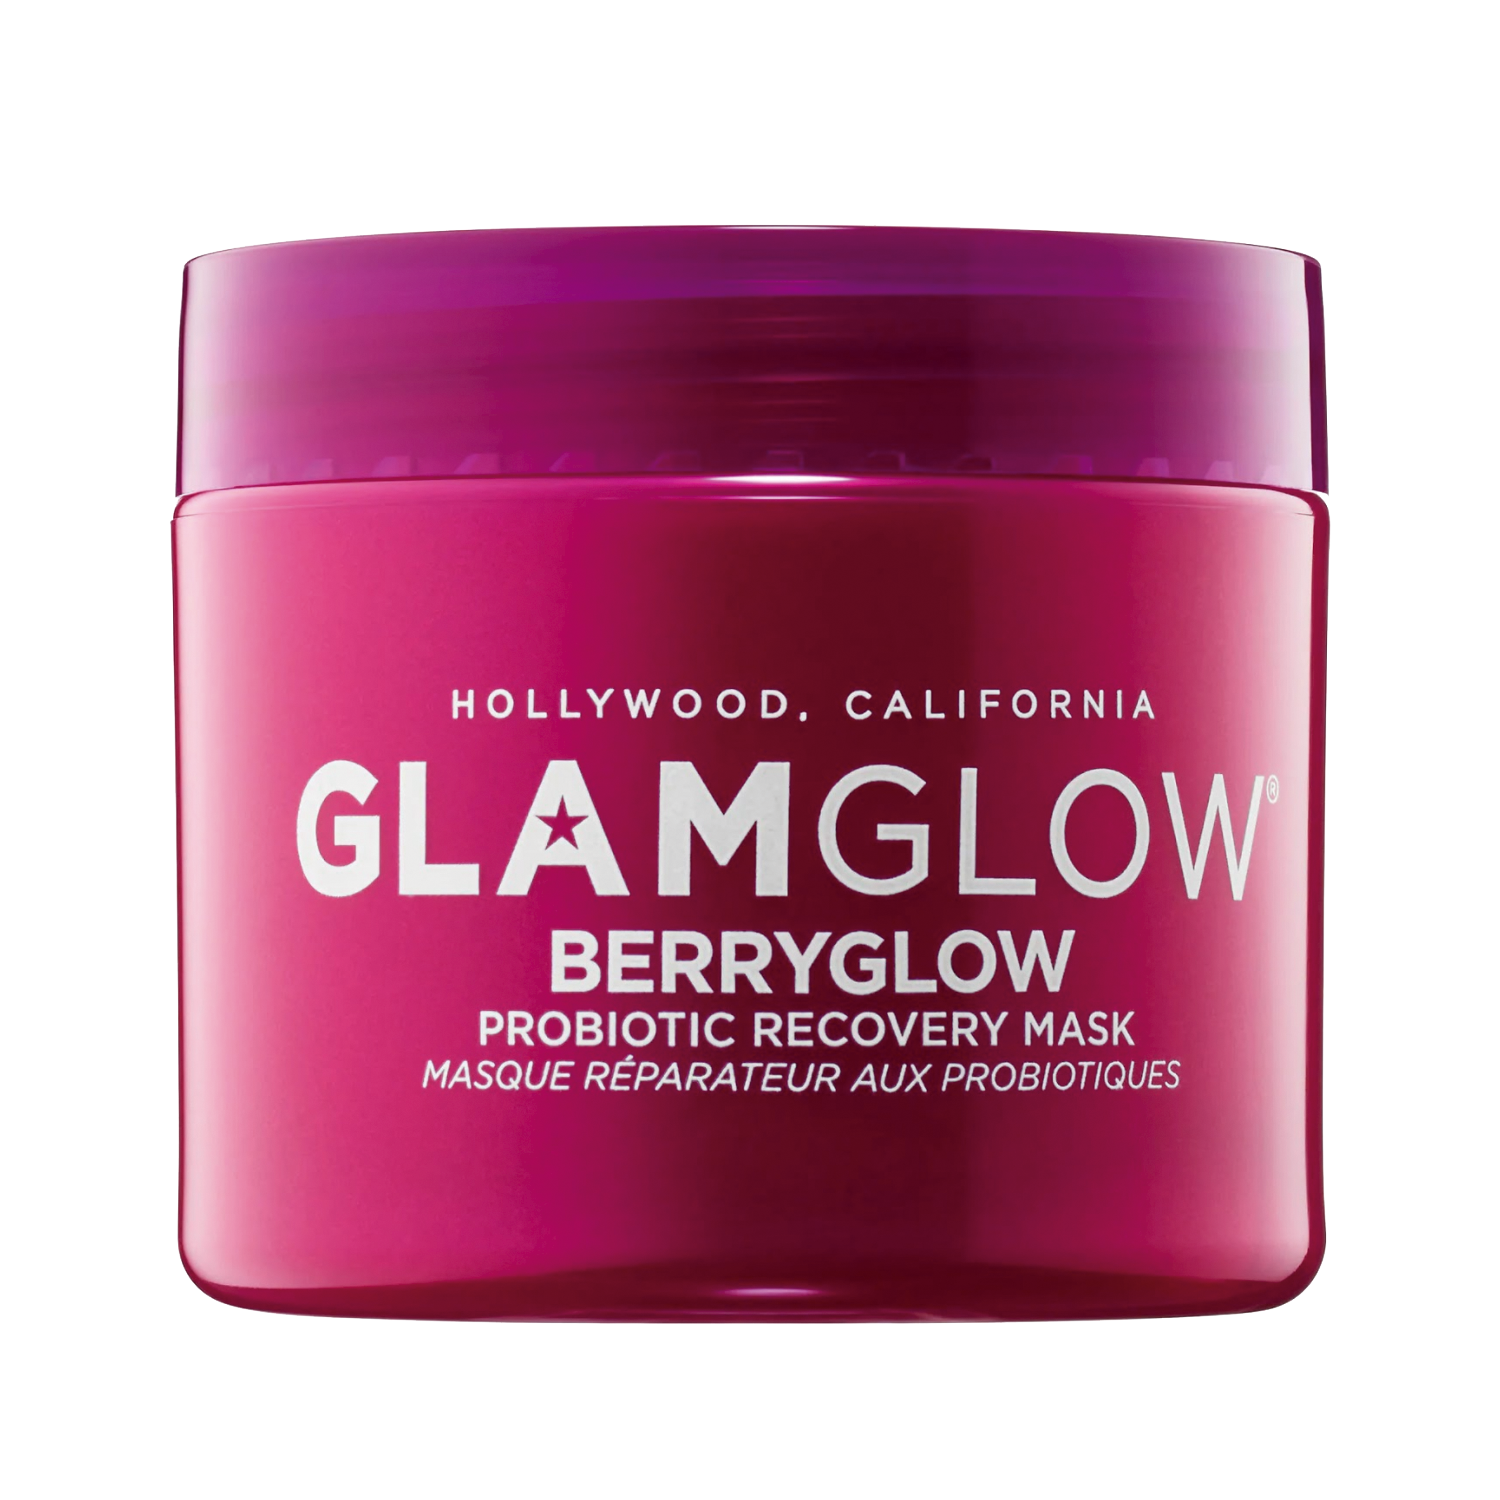 GLAMGLOW BERRYGLOW PROBIOTIC RECOVERY MASK- GLAMGLOW BERRYGLOW PROBIOTIC RECOVERY MASK- 1